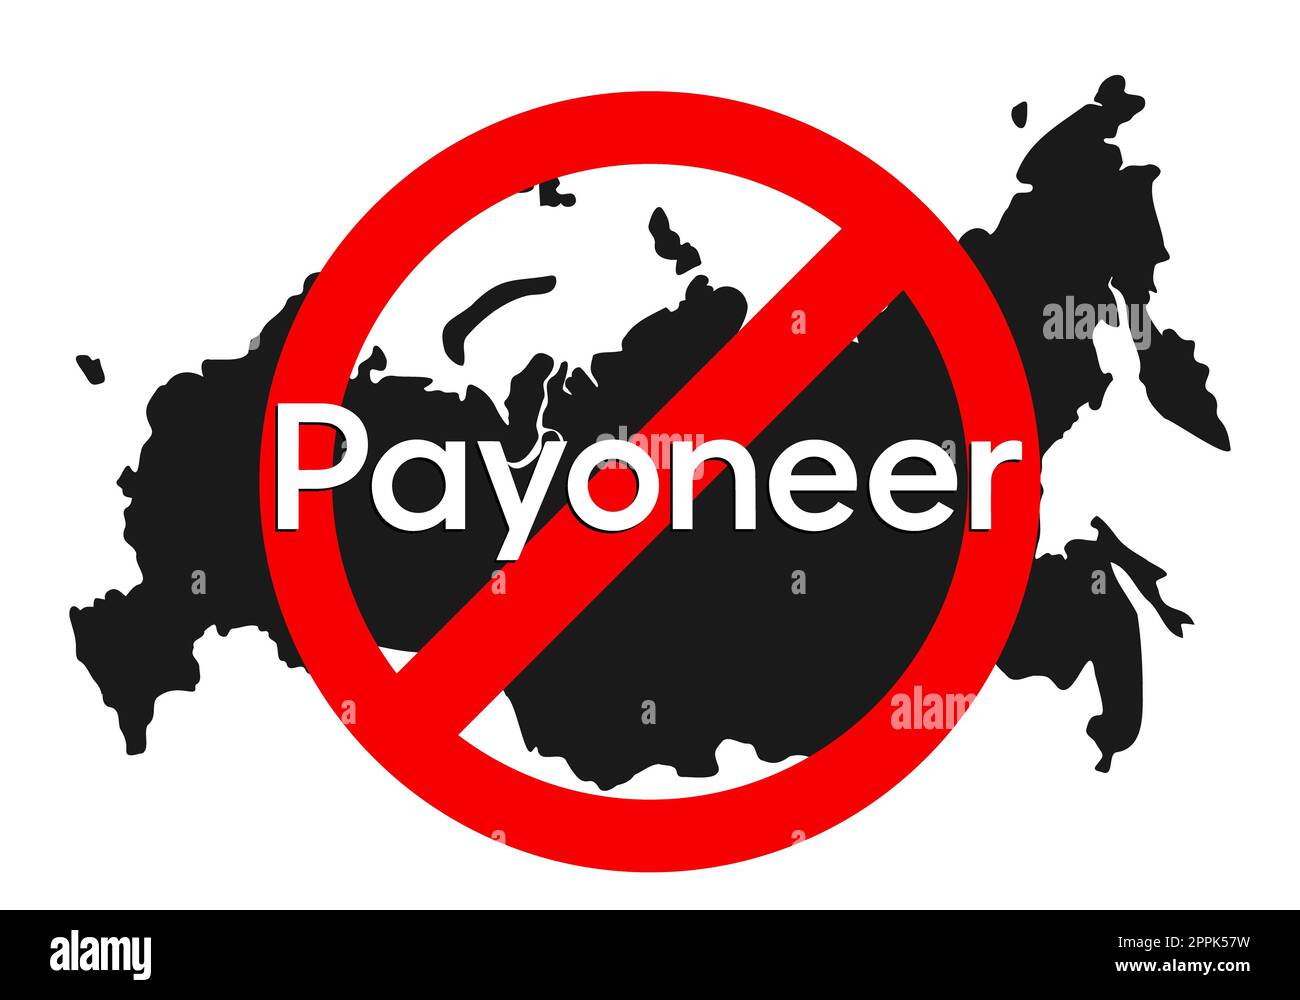 Kyiv, Ukraine - November, 15 2022: Logo Payoneer financial system logo under red prohibition sign with Russian map at background. Sanctions against Russia, and disconnection from payments through war. Stock Photo